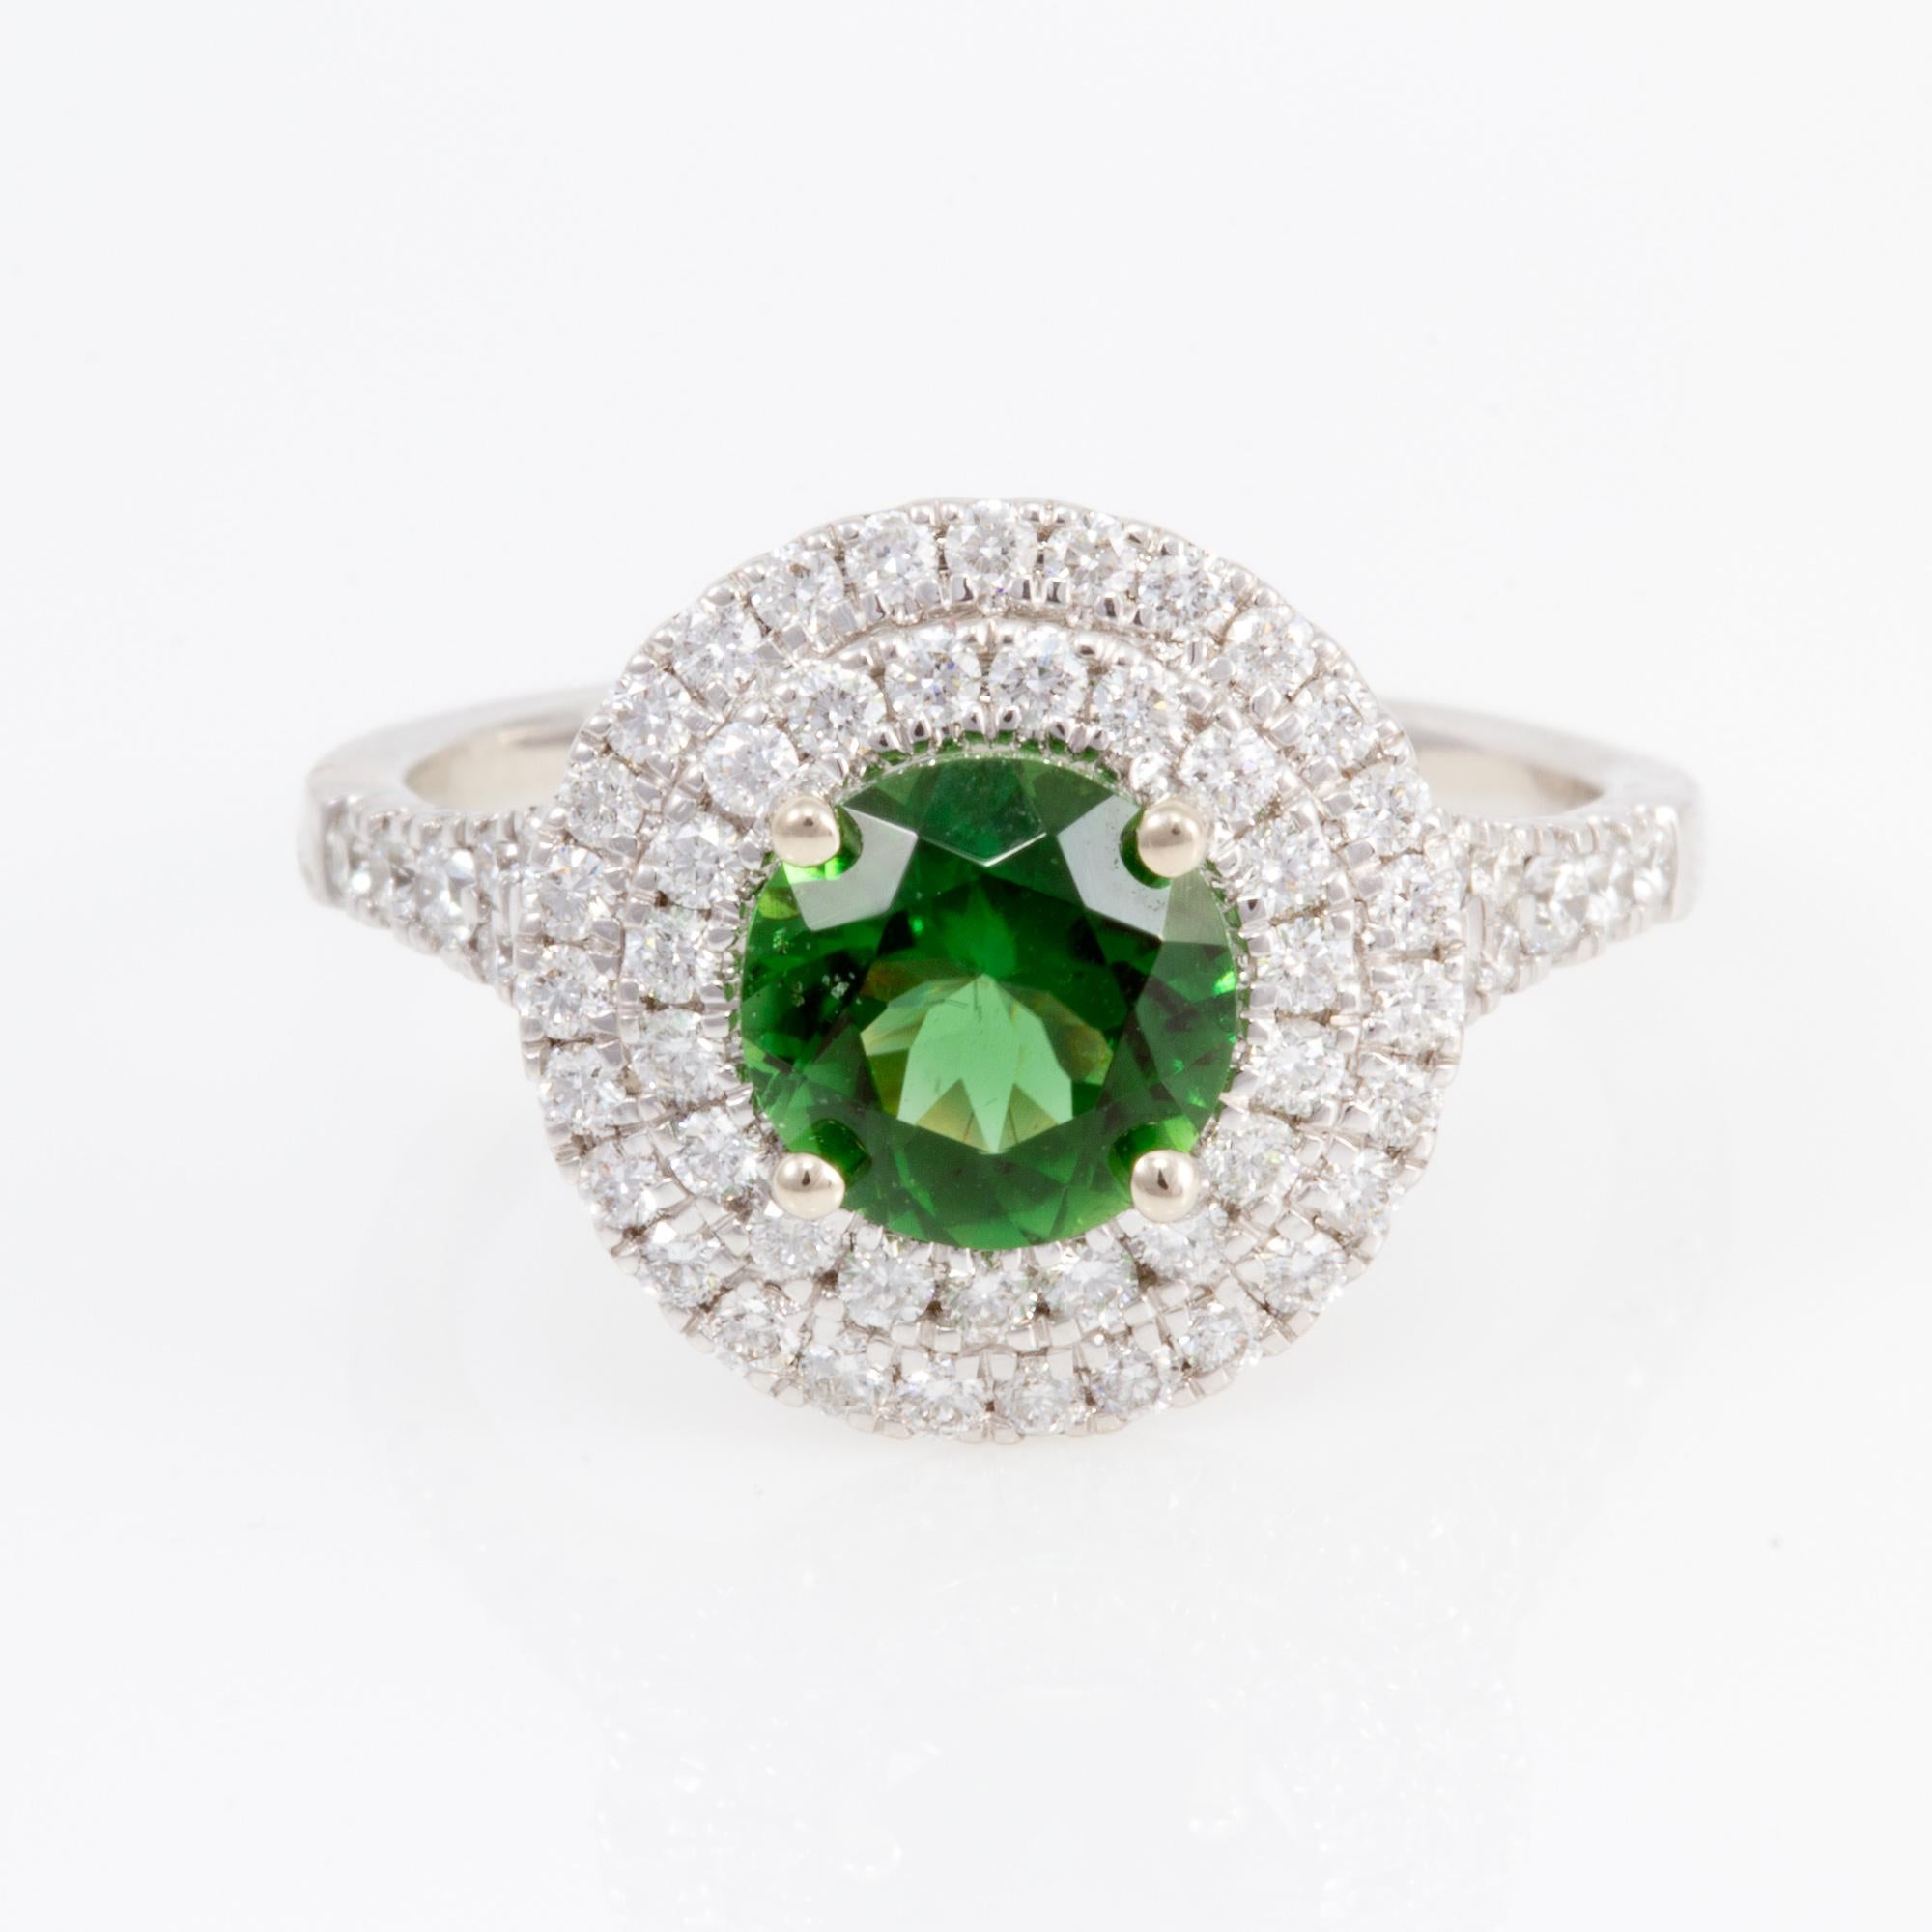 Round Cut Exceptionally Well Cut 1.26 Carat Chrome Tourmaline and Diamond Ring